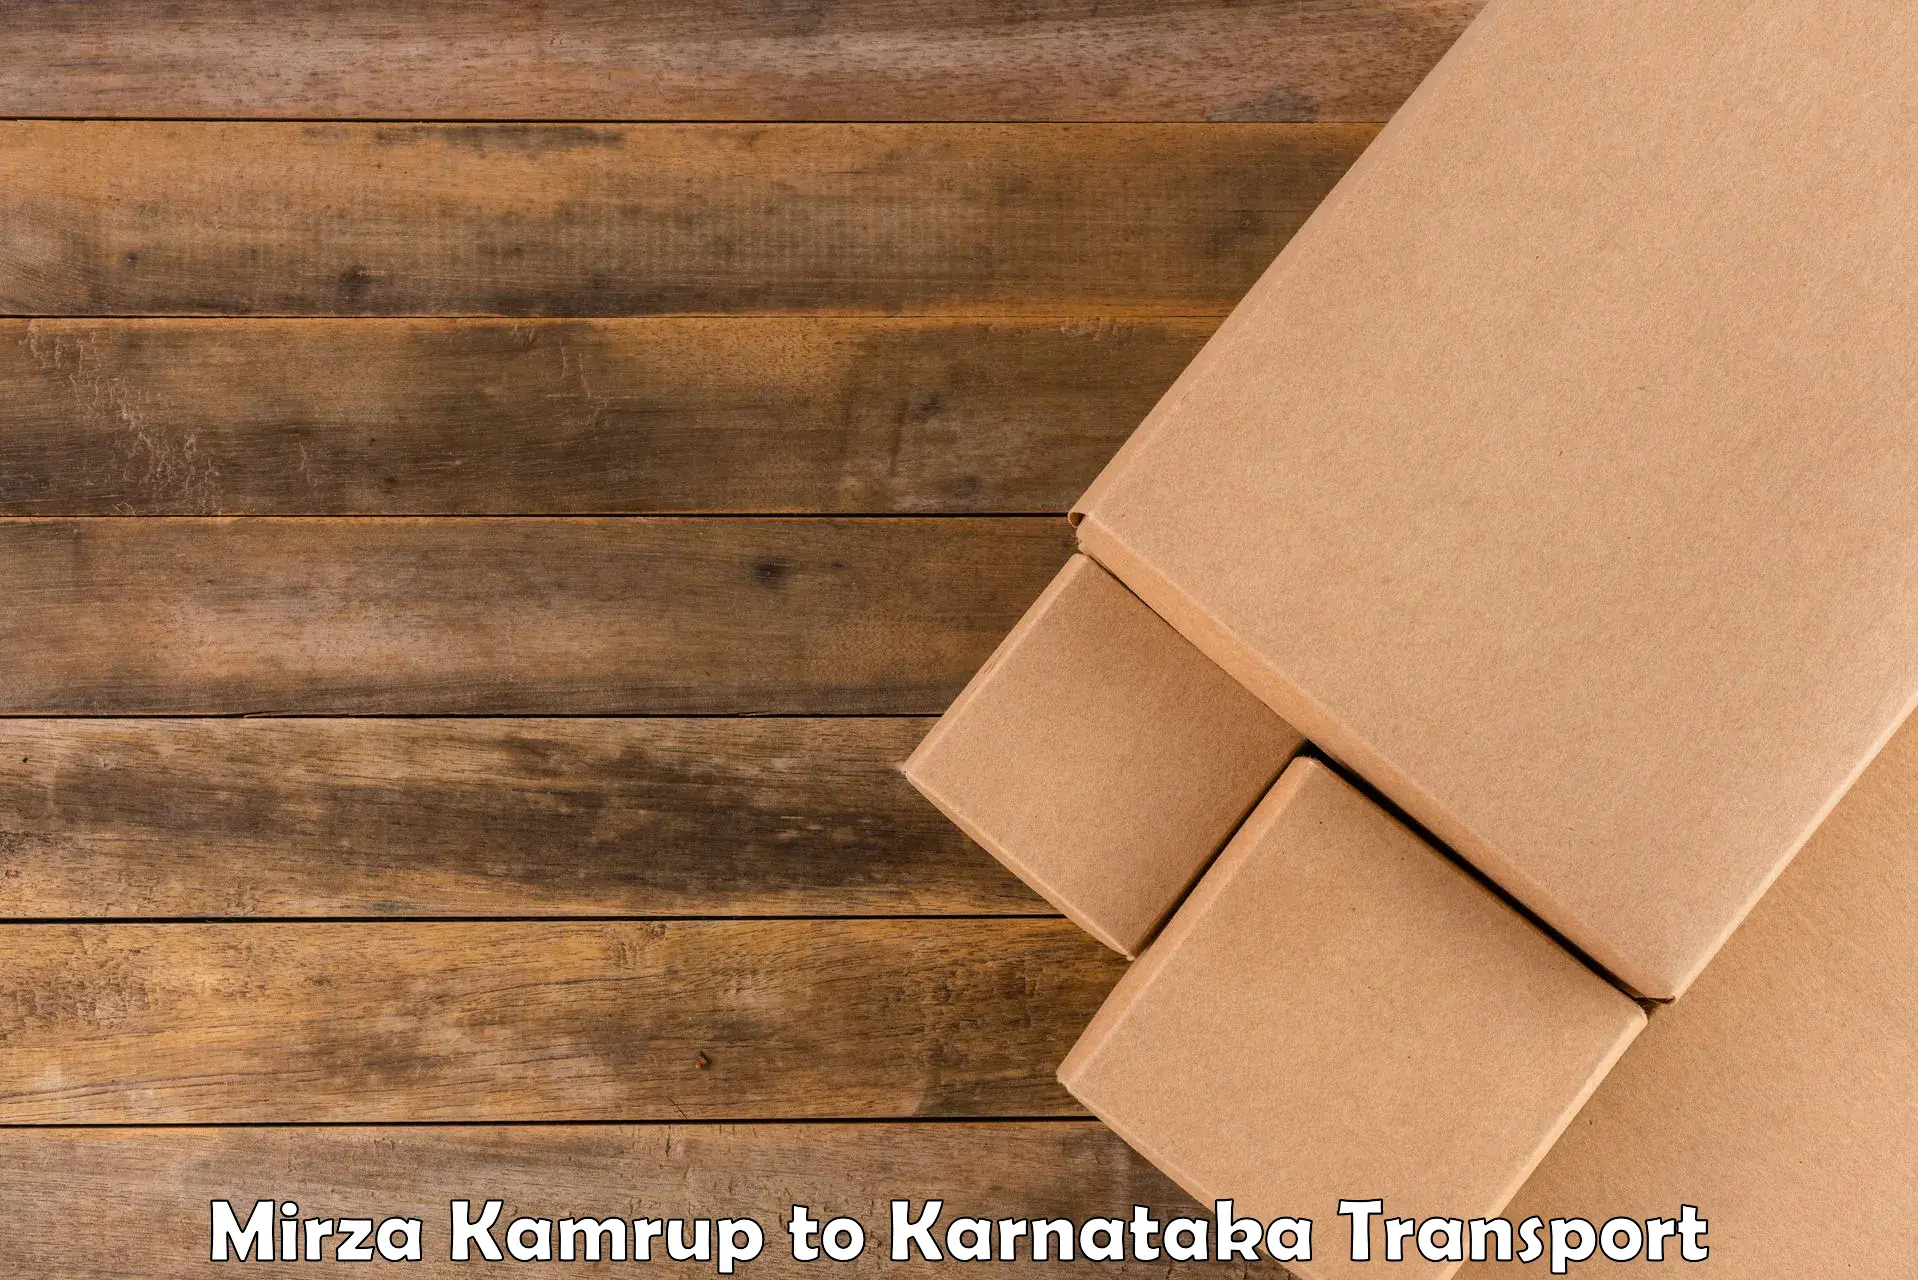 Truck transport companies in India Mirza Kamrup to Tiptur